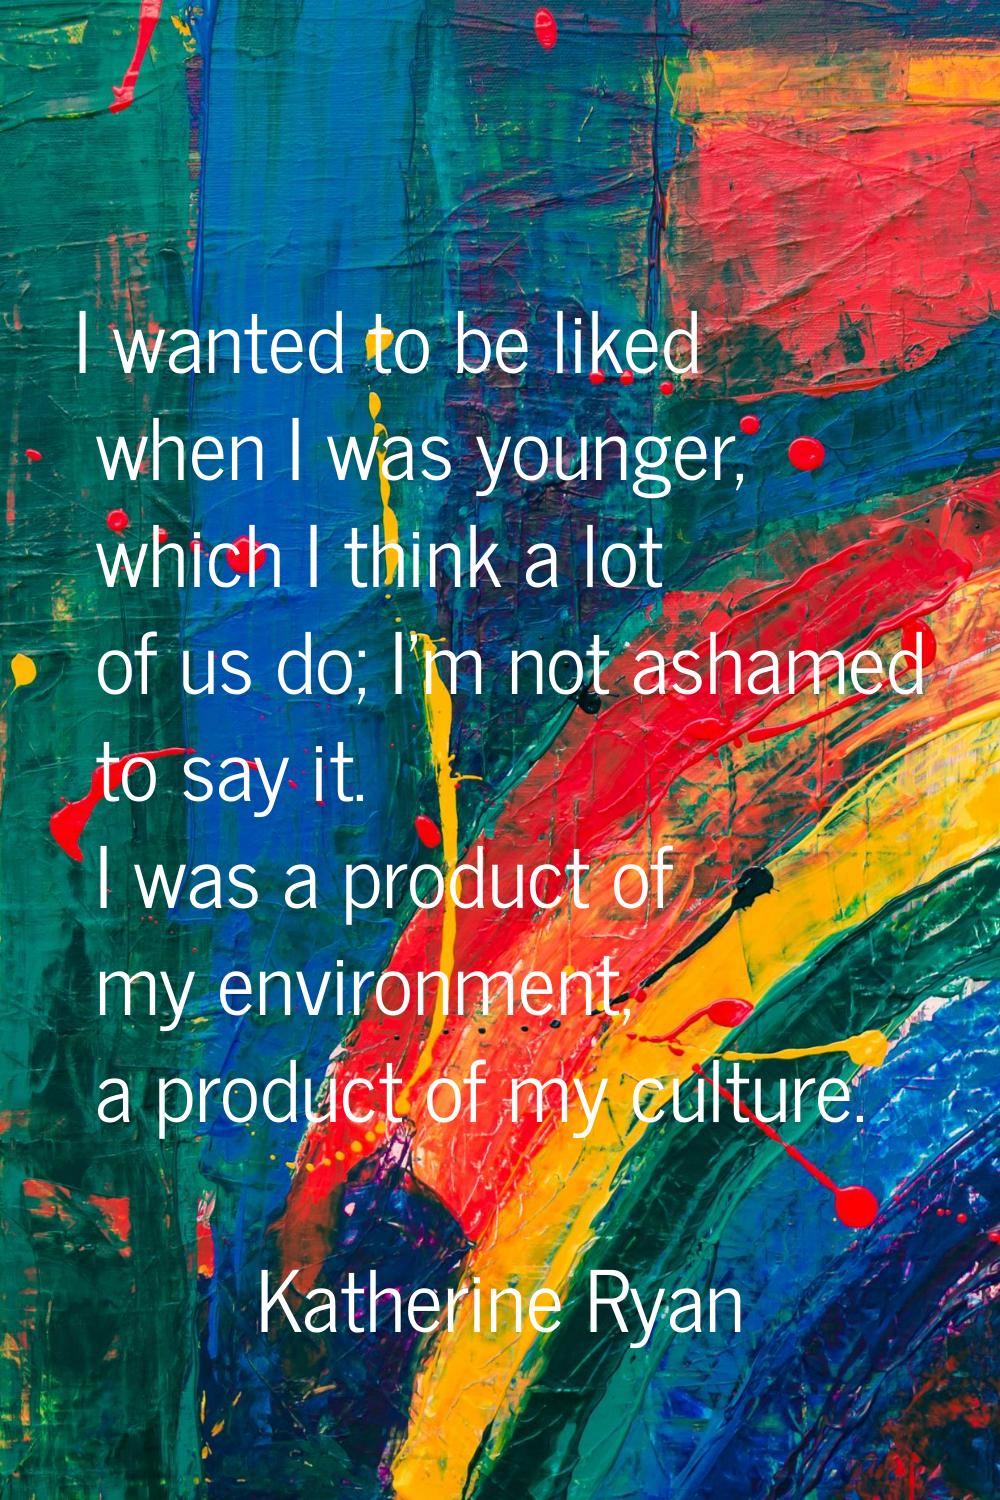 I wanted to be liked when I was younger, which I think a lot of us do; I'm not ashamed to say it. I